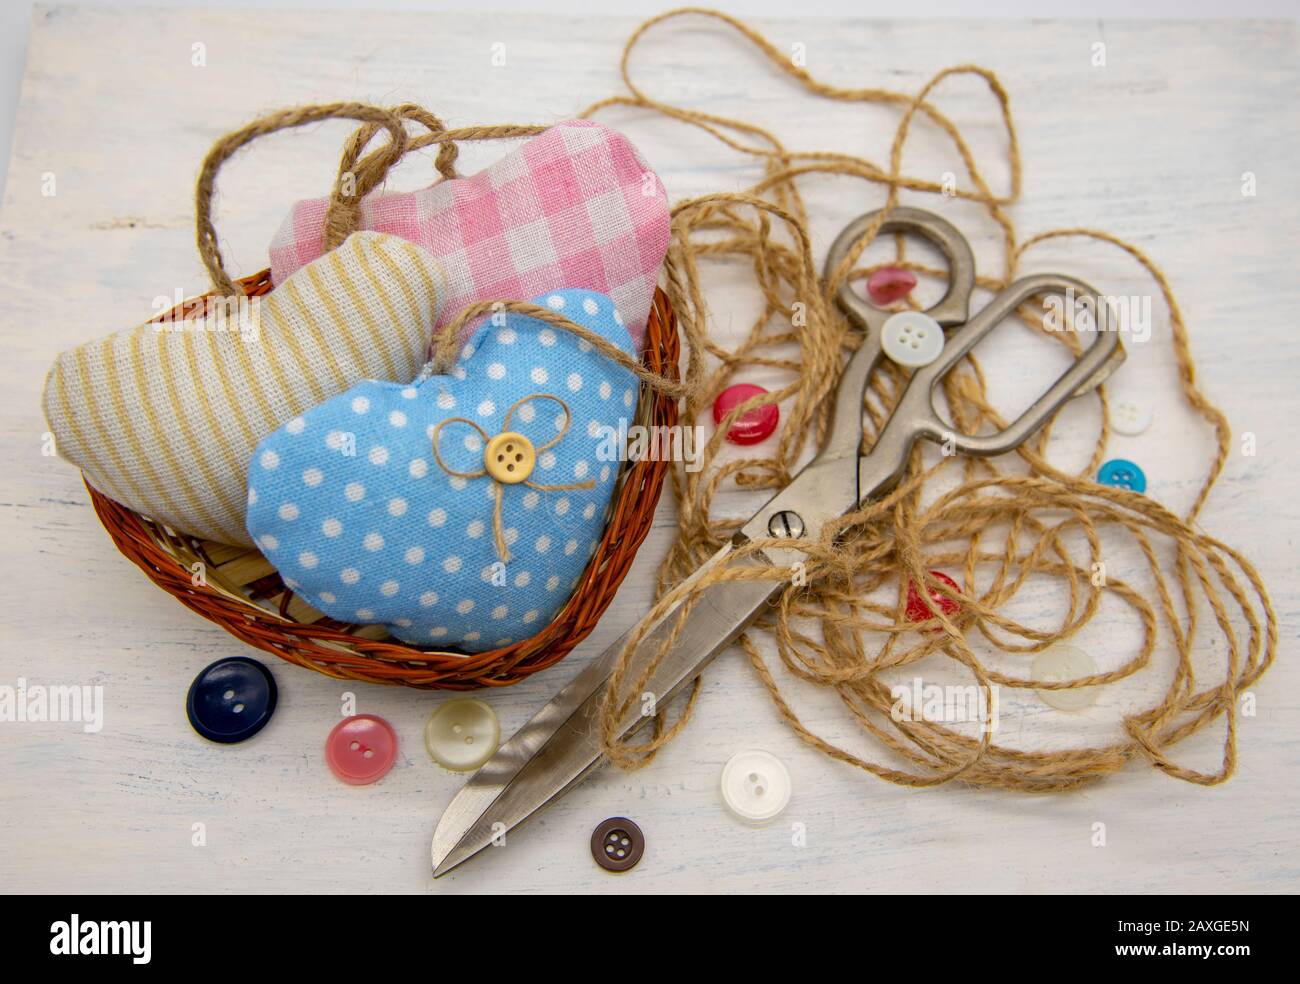 A basket filled with hearts sewn from scraps of fabric, next to large retro tailor's scissors, coarse thread and colorful buttons. Stock Photo